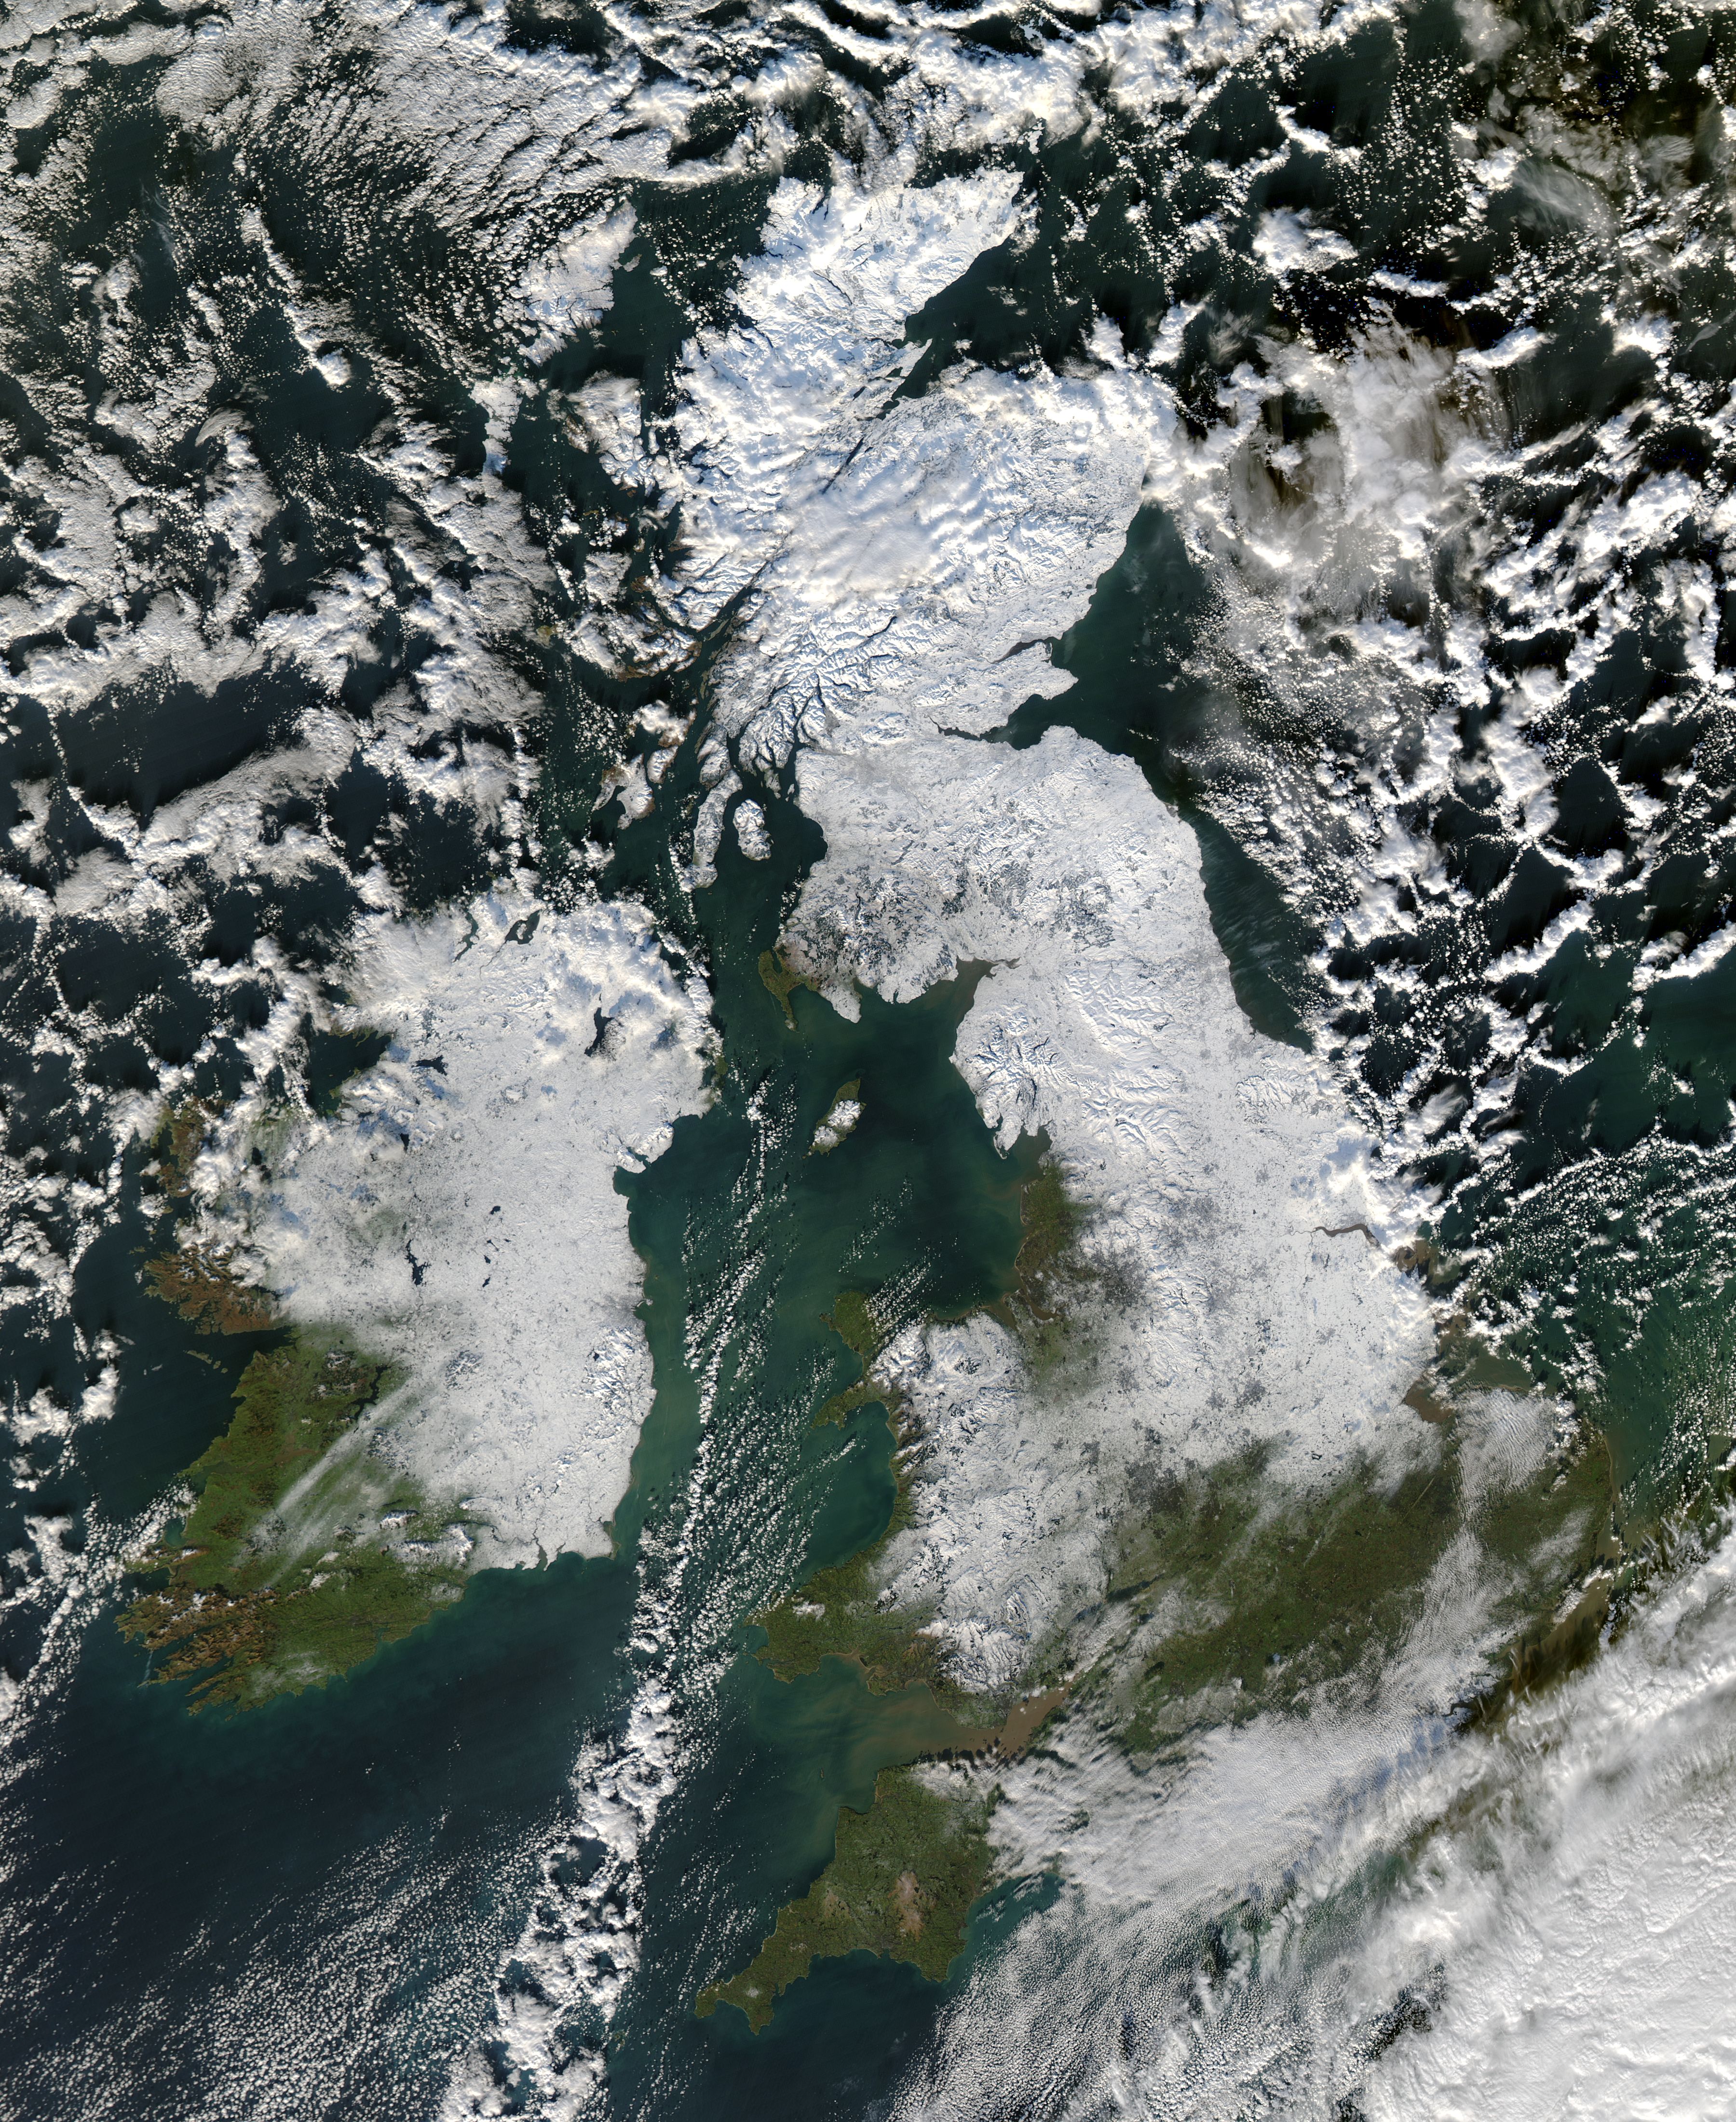 Ireland and the UK Covered in Snow